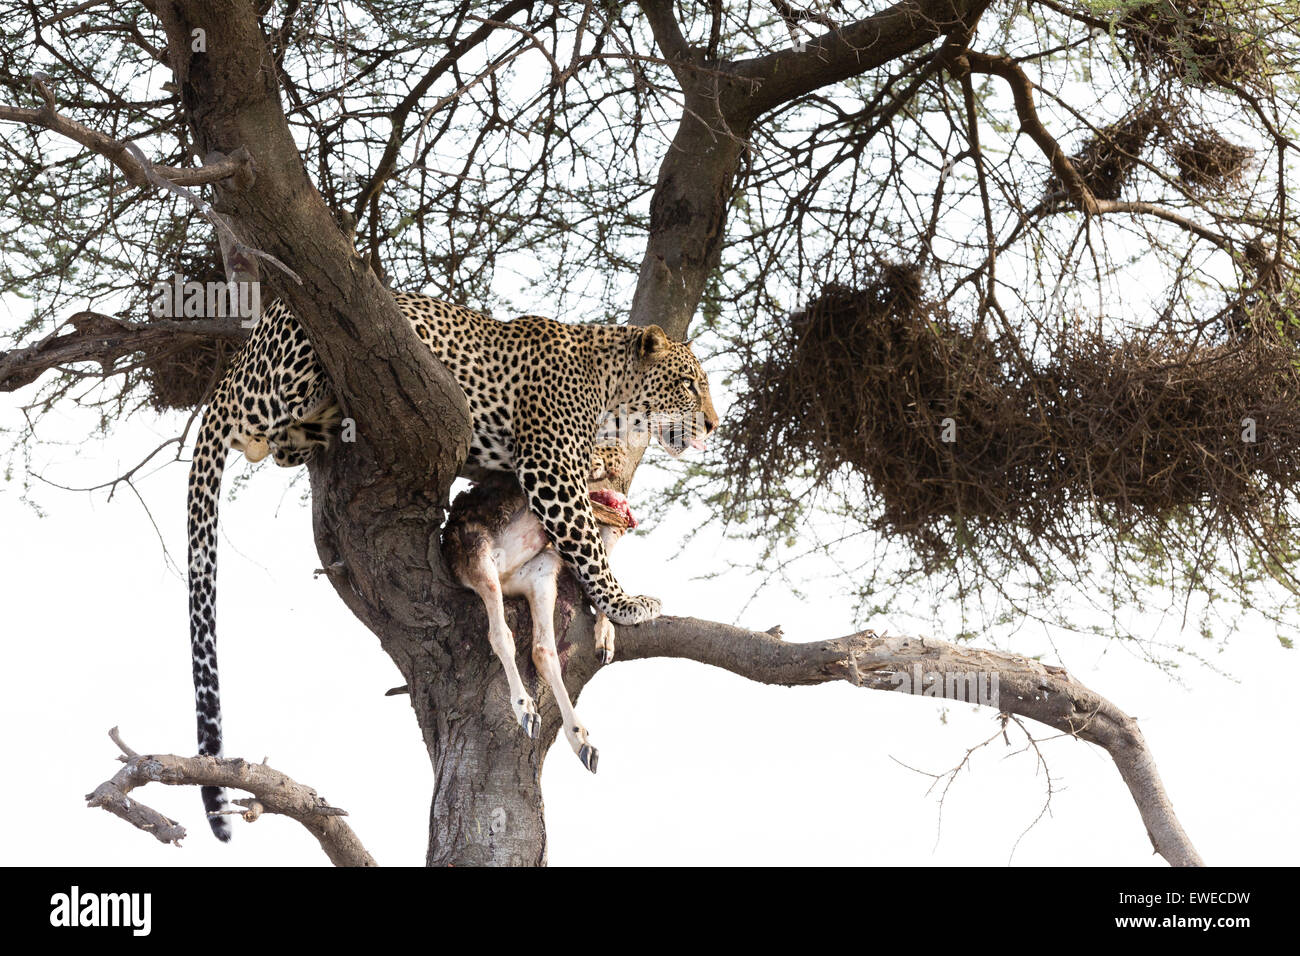 A Leopard (Panthera pardus) with juvenile wildebeest prey in a tree Serengeti Tanzania Stock Photo